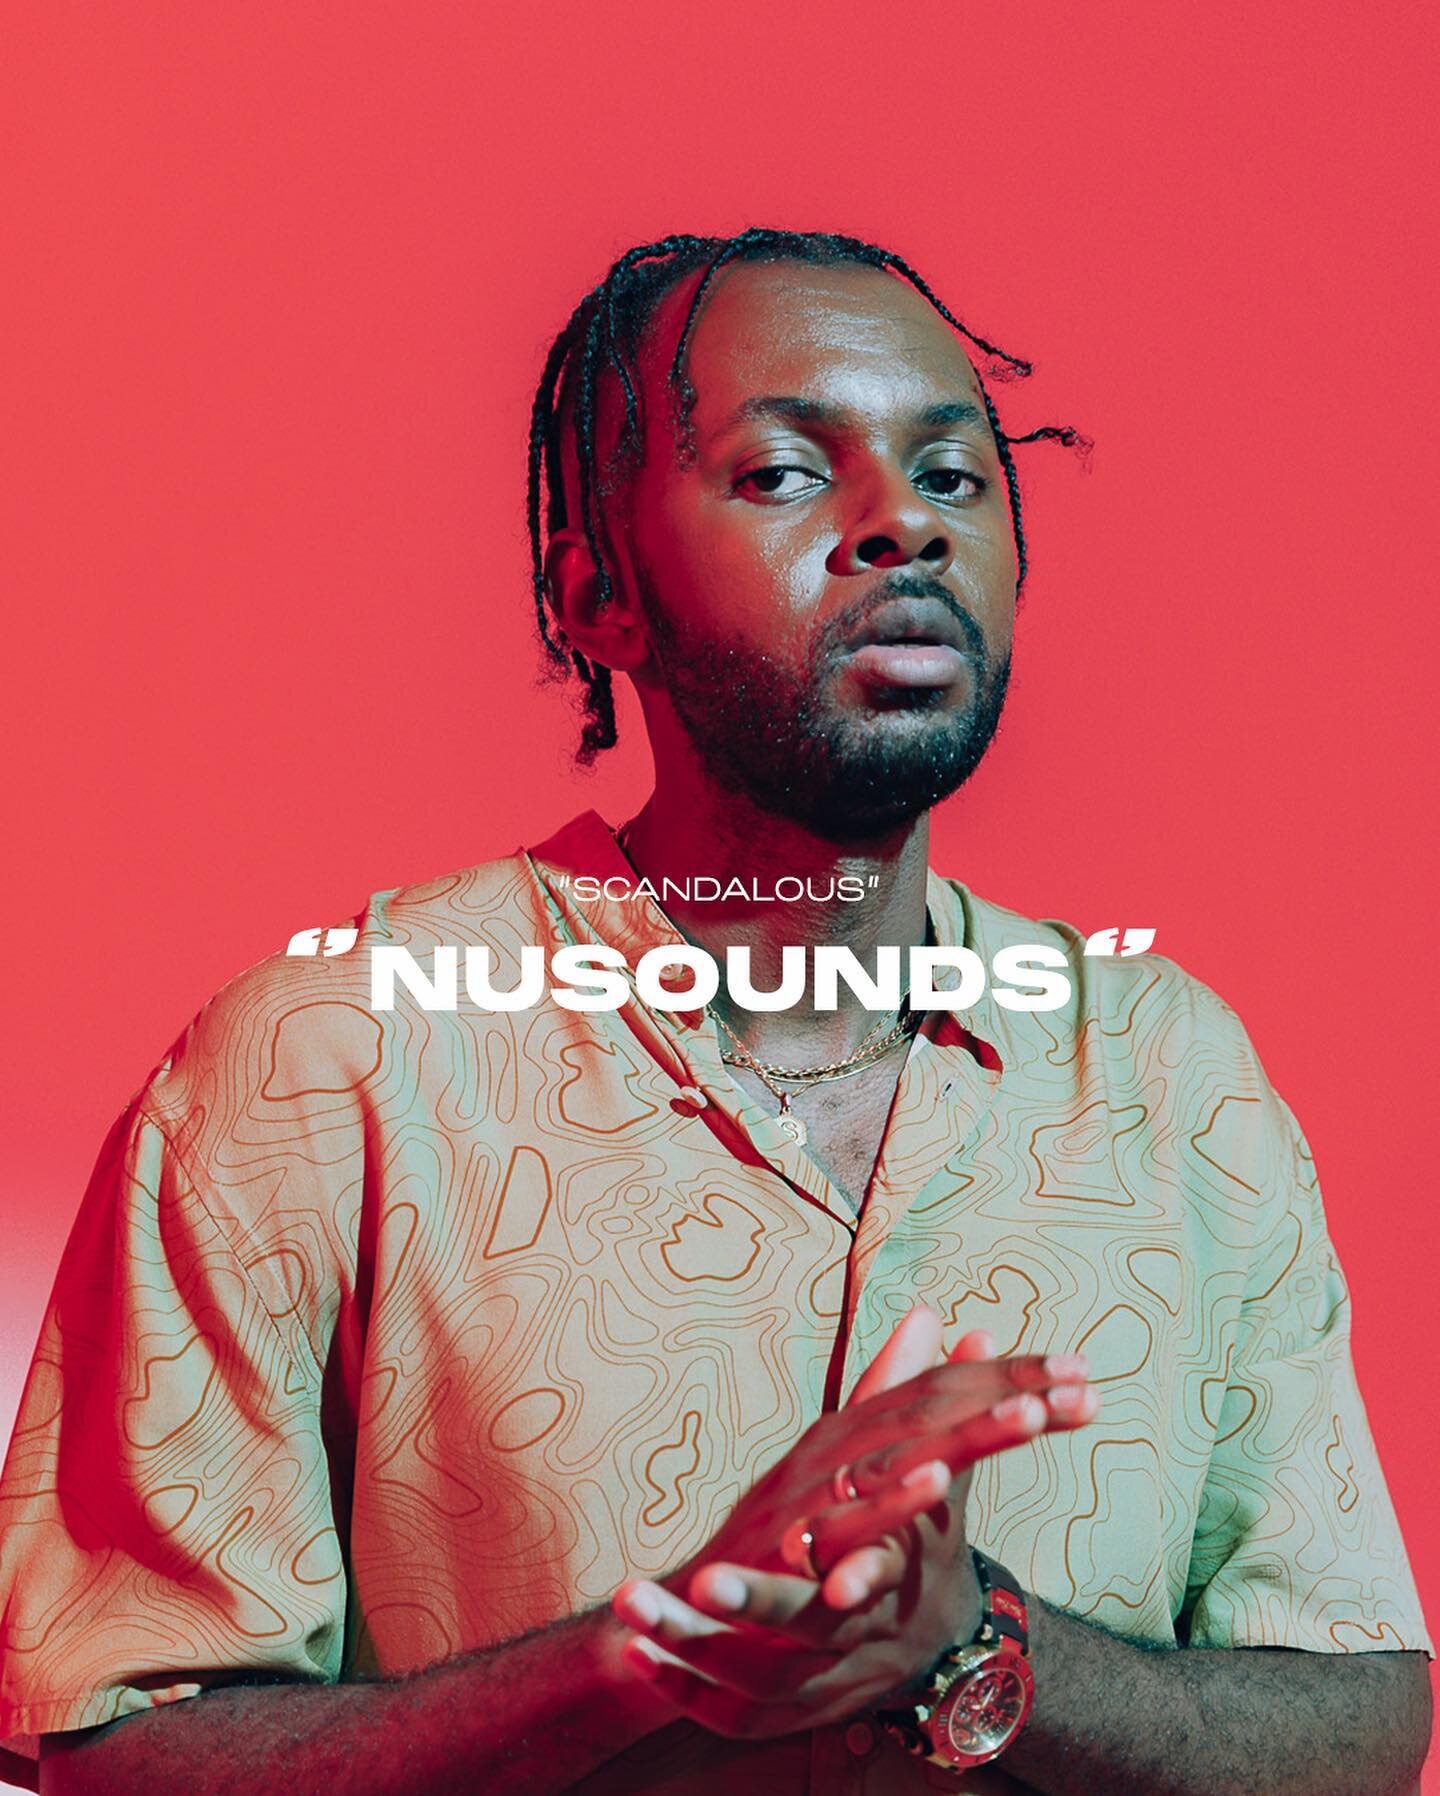 #NUSOUNDS No.3 | @danonkar Performance of &ldquo;scandalous&rdquo; is live now on our Youtube Channel / link in bio.
&bull;

Out Now! 🌹💥
NUSOUNDS is A a platform spotlighting the best and most unique talent in the U.K.
&bull;
Director / photography